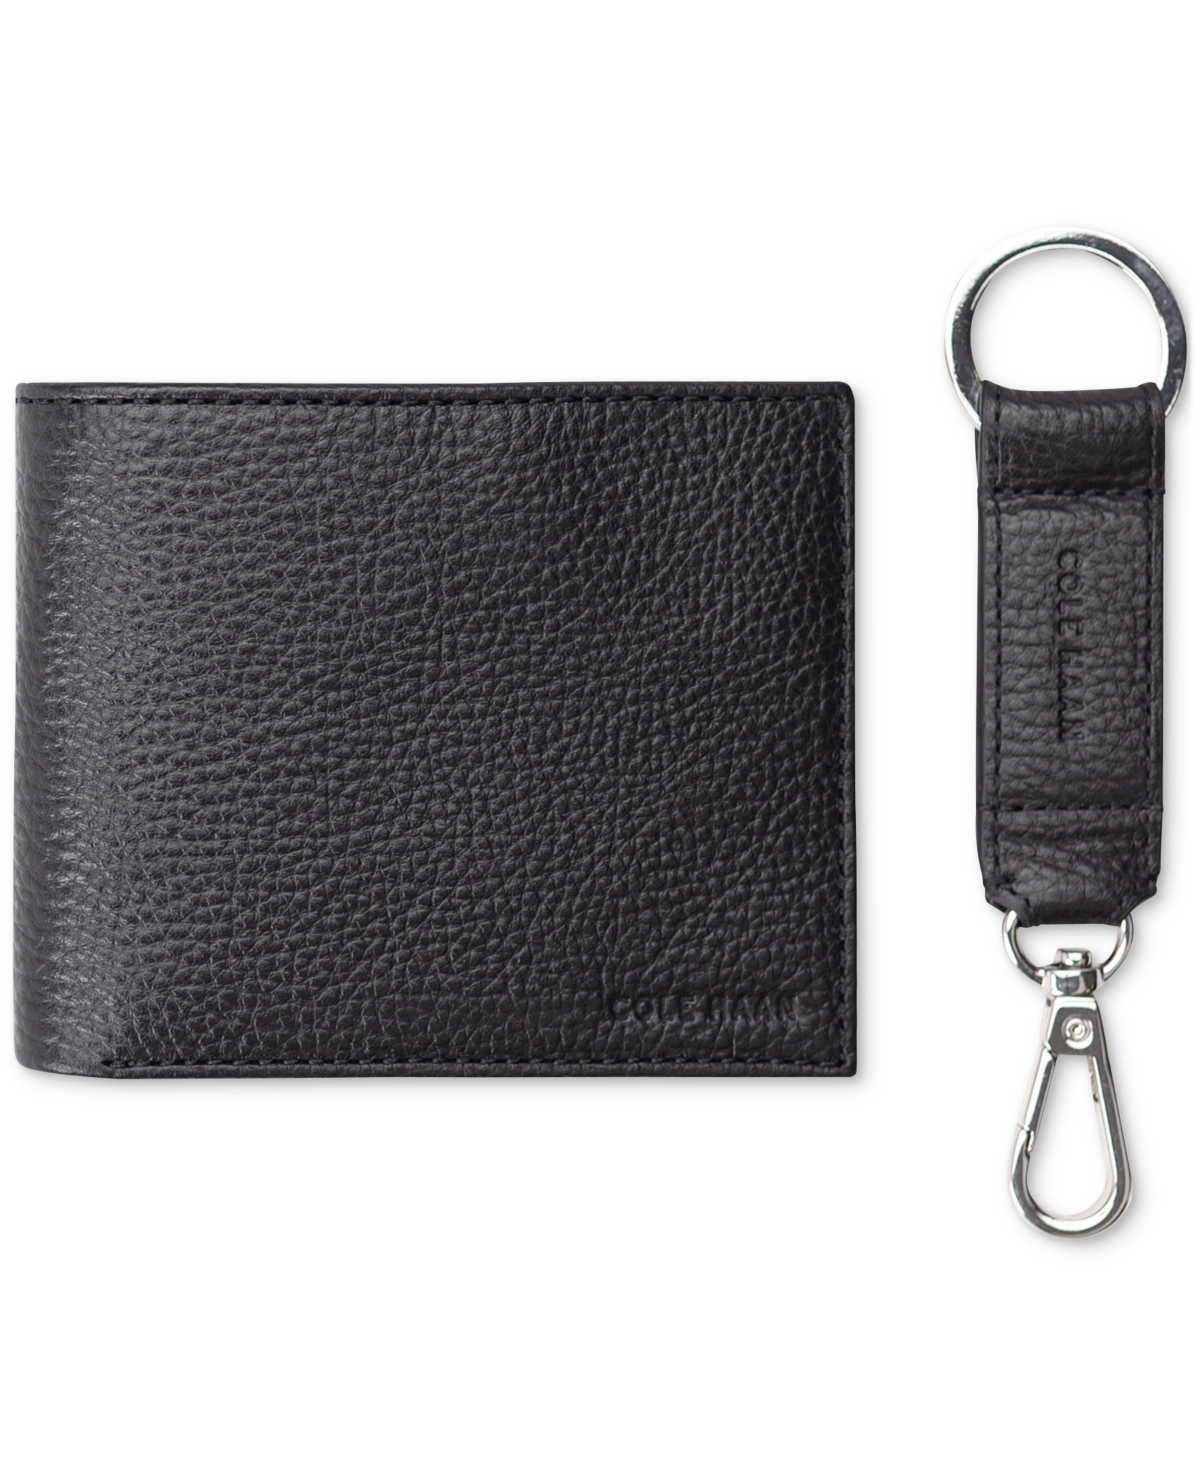 Men's Leather Billfold Wallet With Key Fob - Black